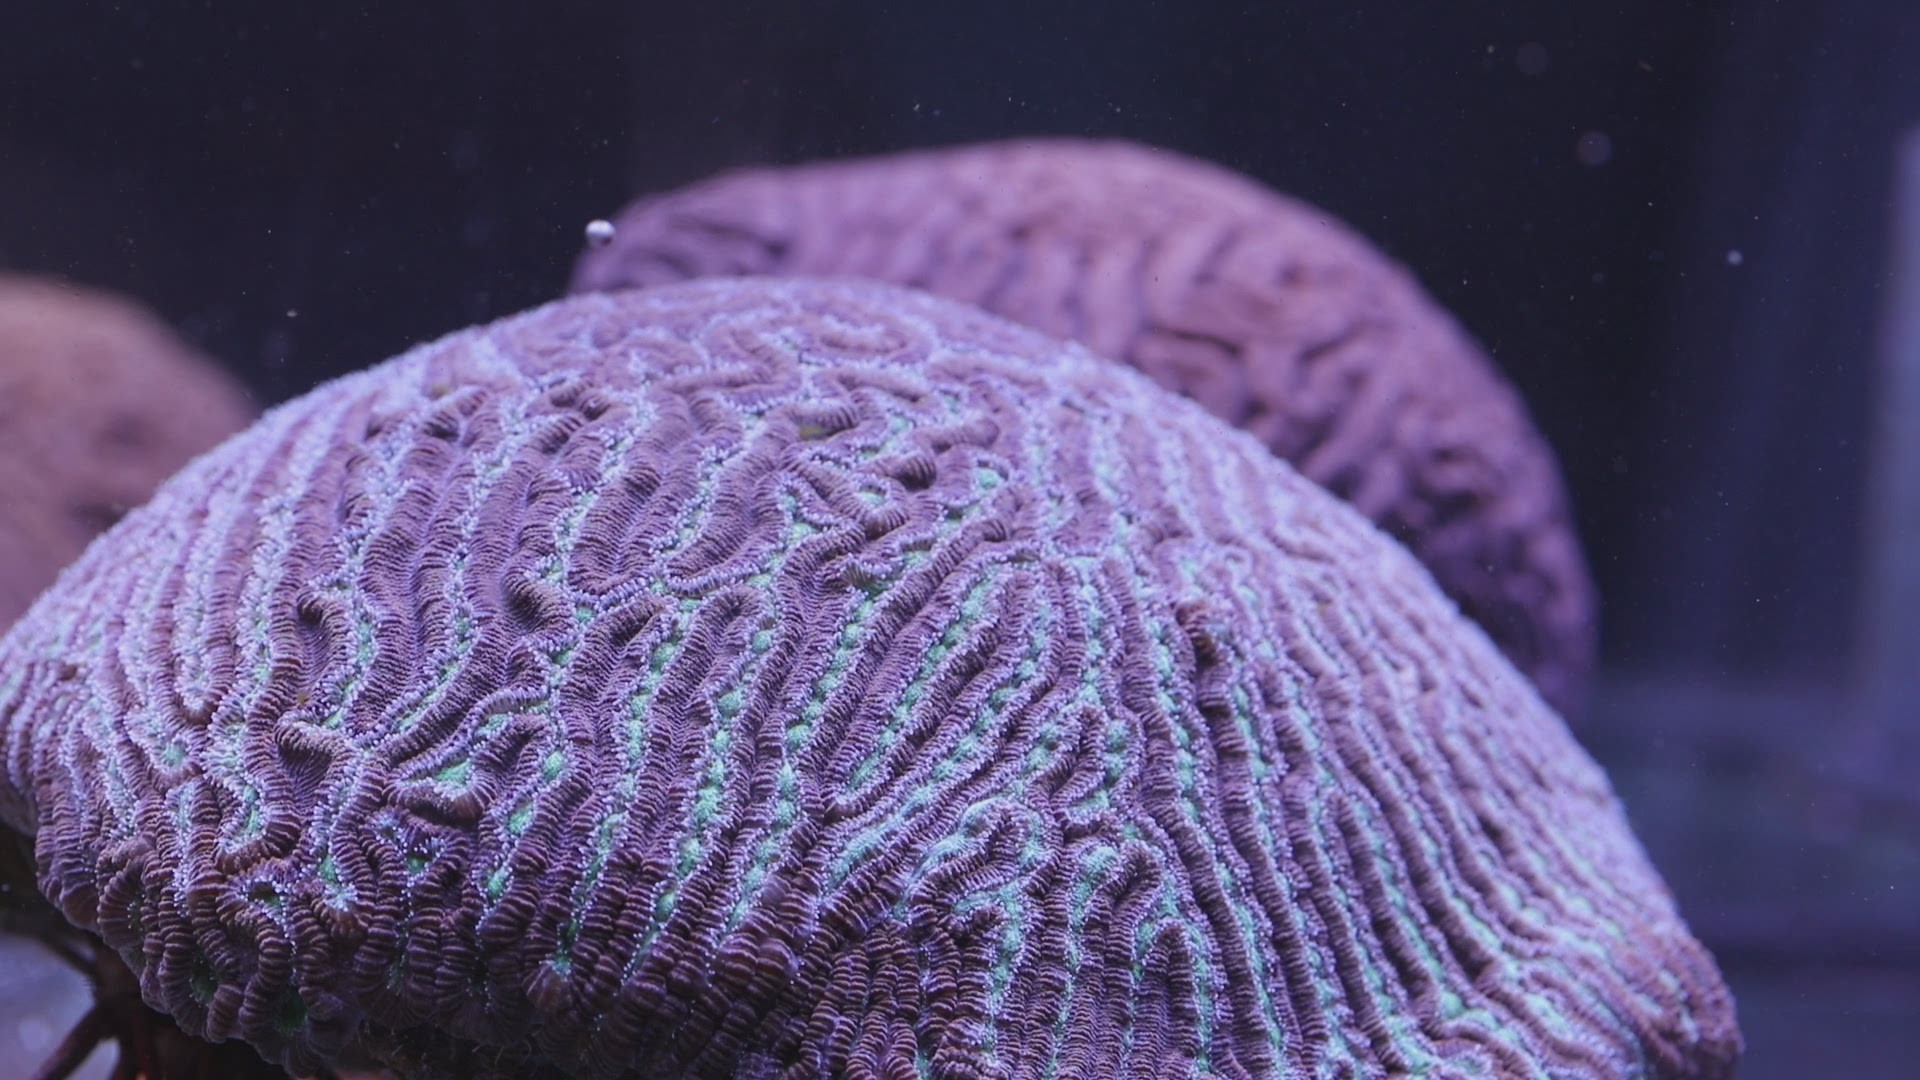 Colorful video shows coral babies being born as part of an effort by The Florida Aquarium to cross-breed wild grooved brain corals.